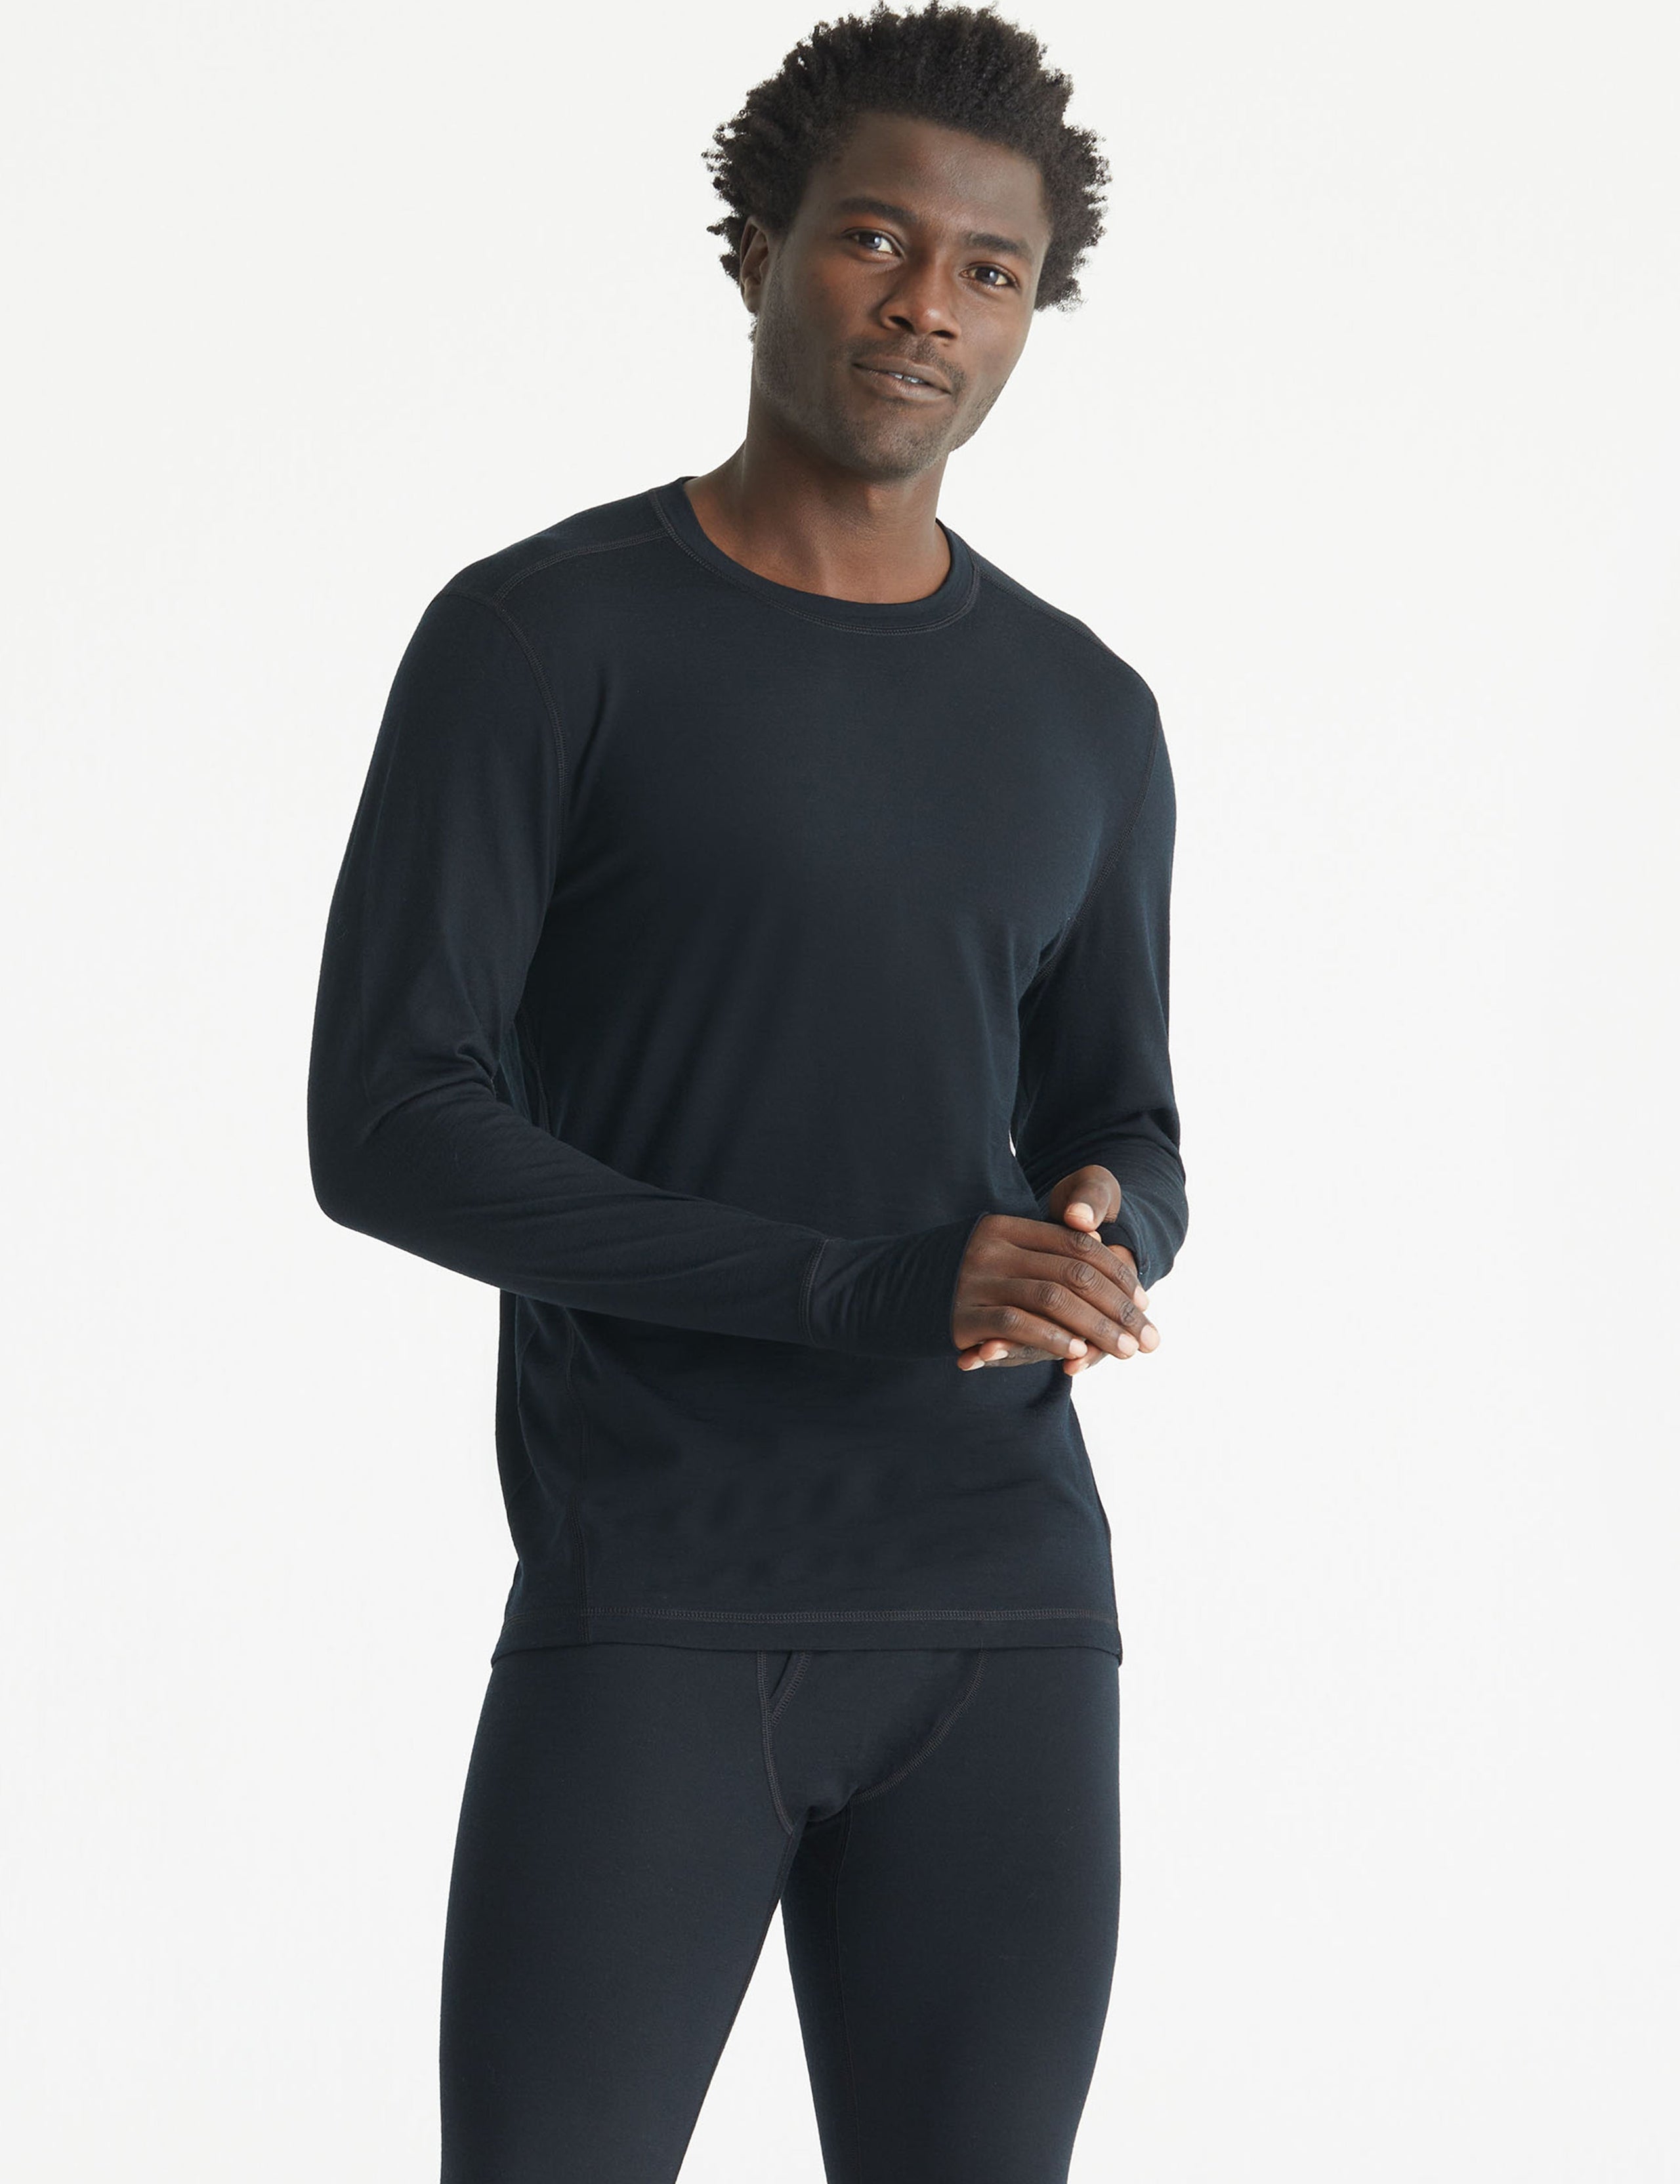 base layer shirt for men from Aether Apparel